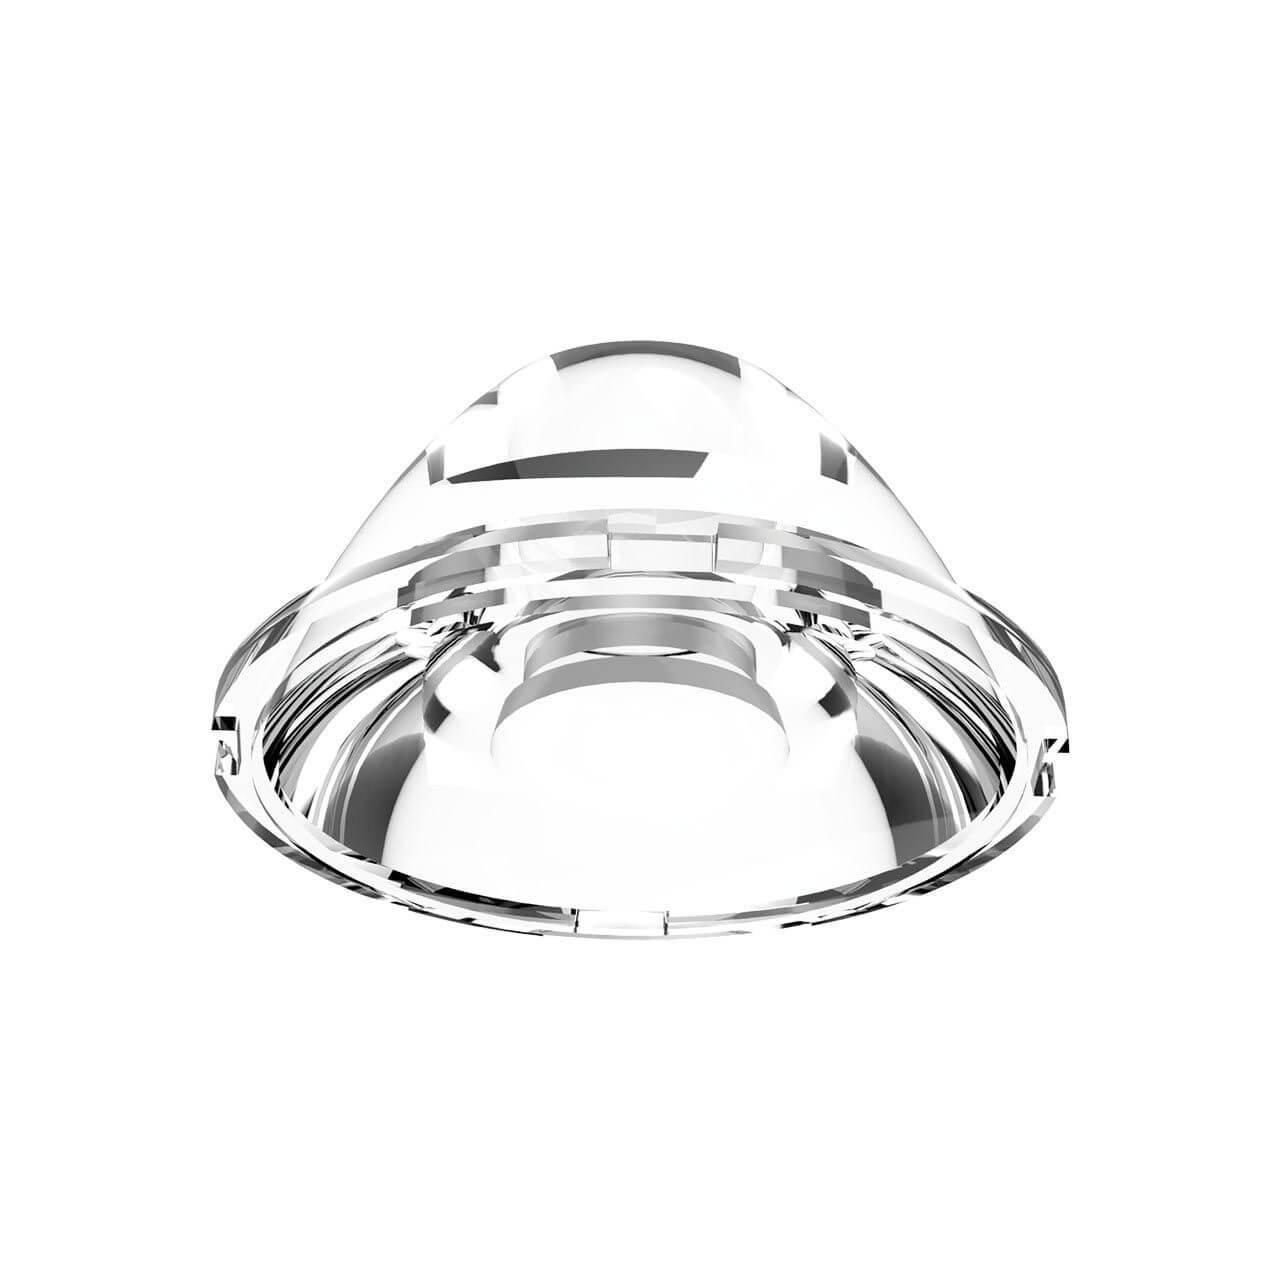   Ideal Lux Dynamic Lens 35 208664